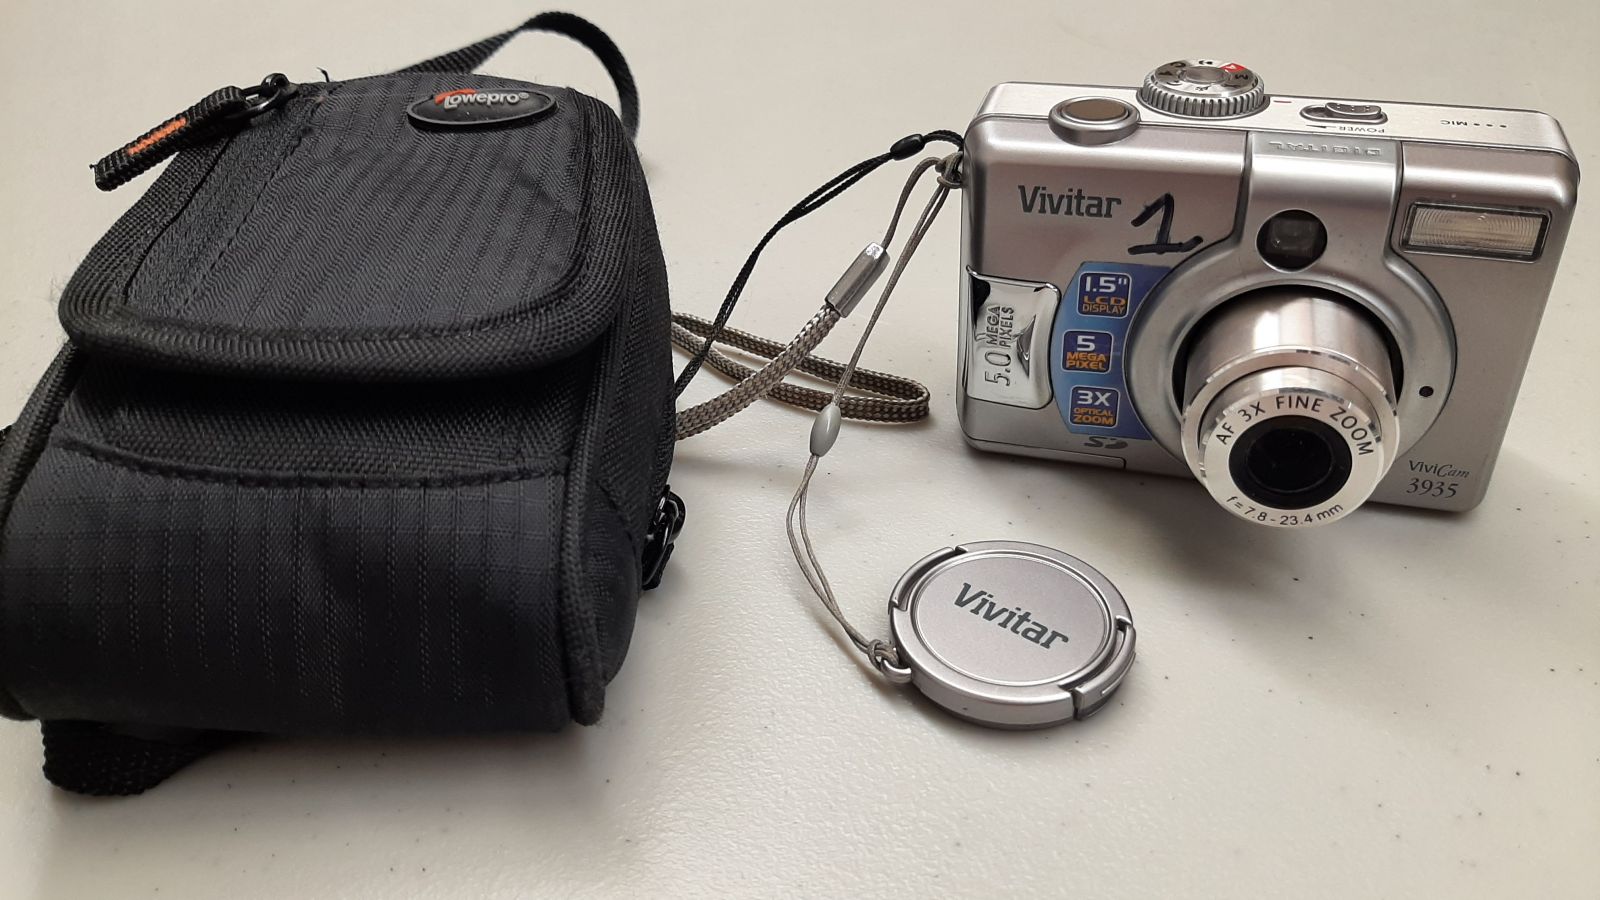 An image of a digital camera with a case.